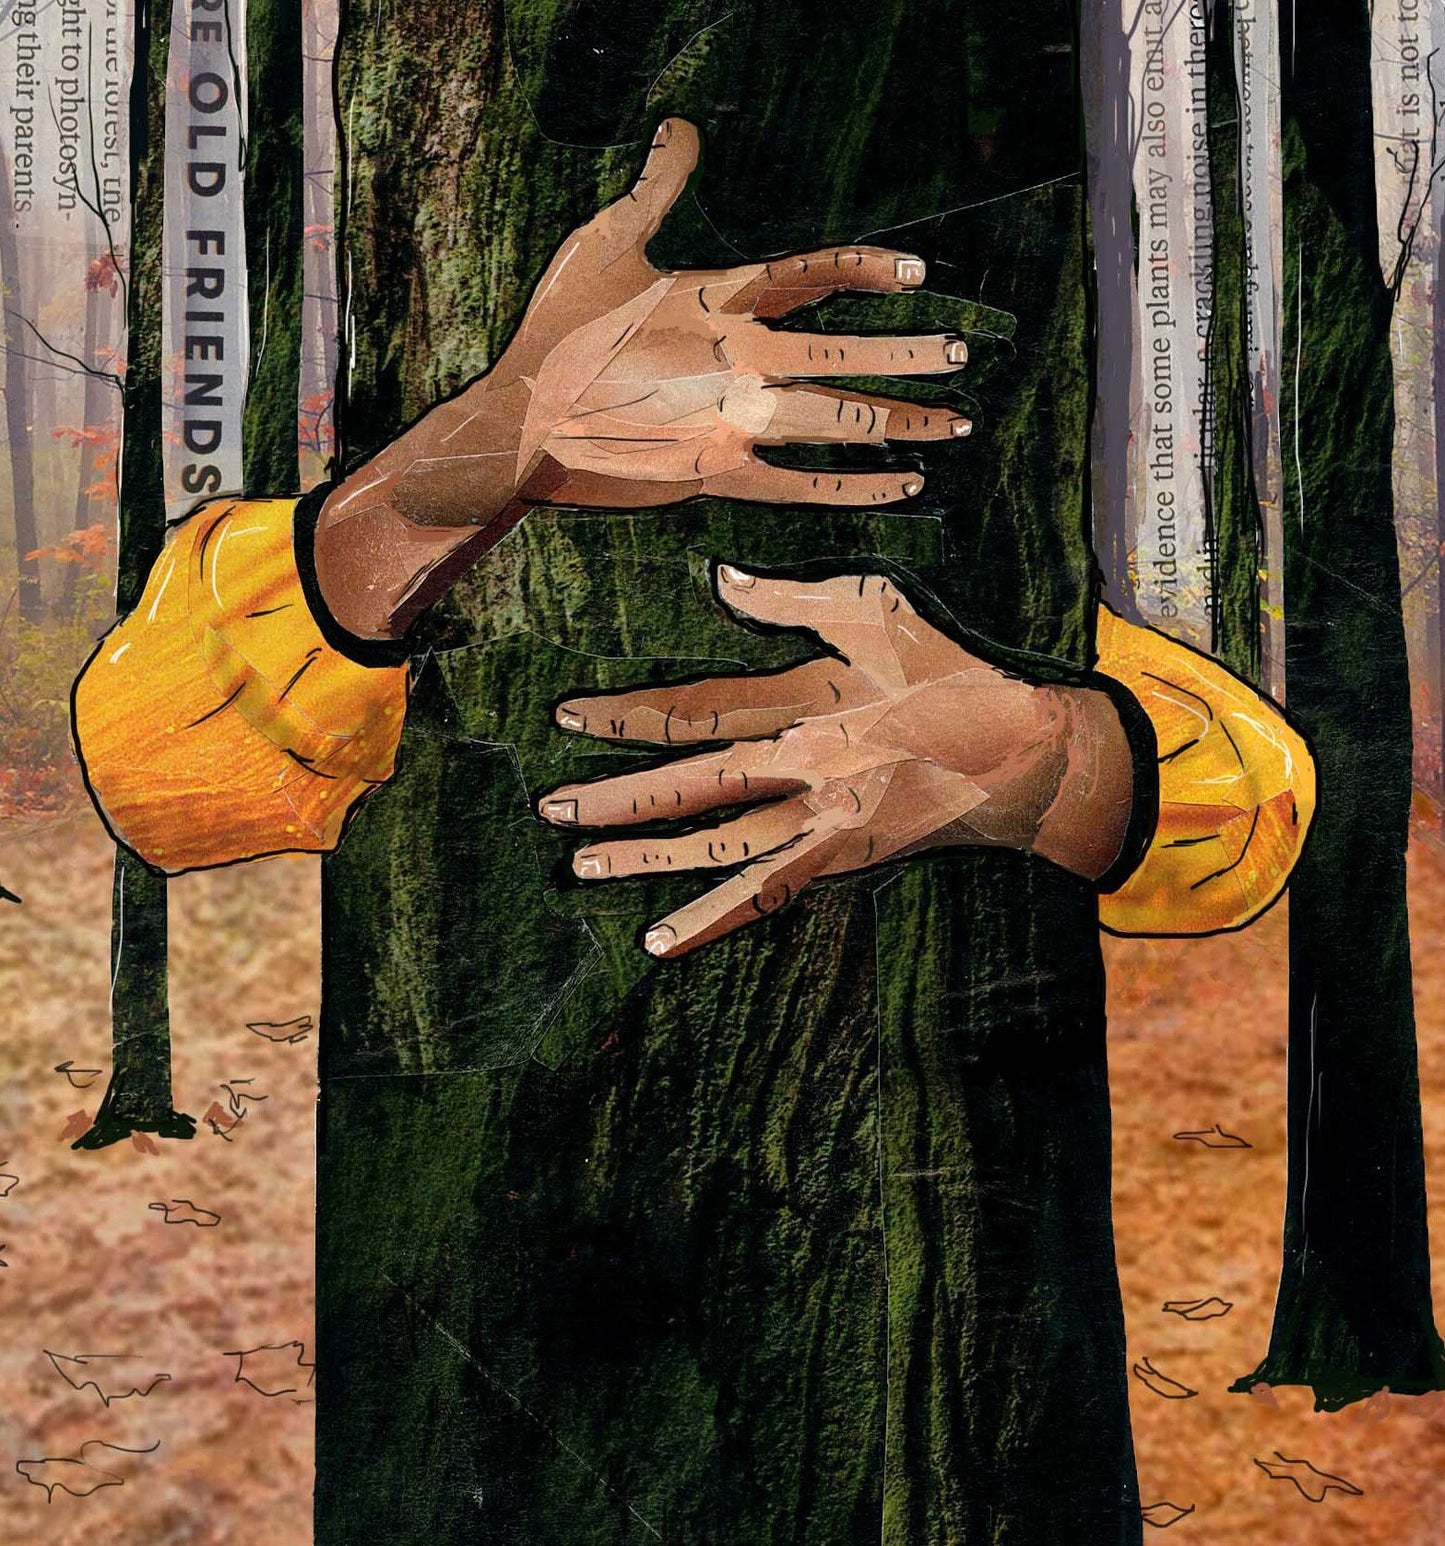 Greeting Card of a Paper Collage of a person hugging a tree, tree hugger, hands, forest, nature, pandemic art, connection - Blank Inside